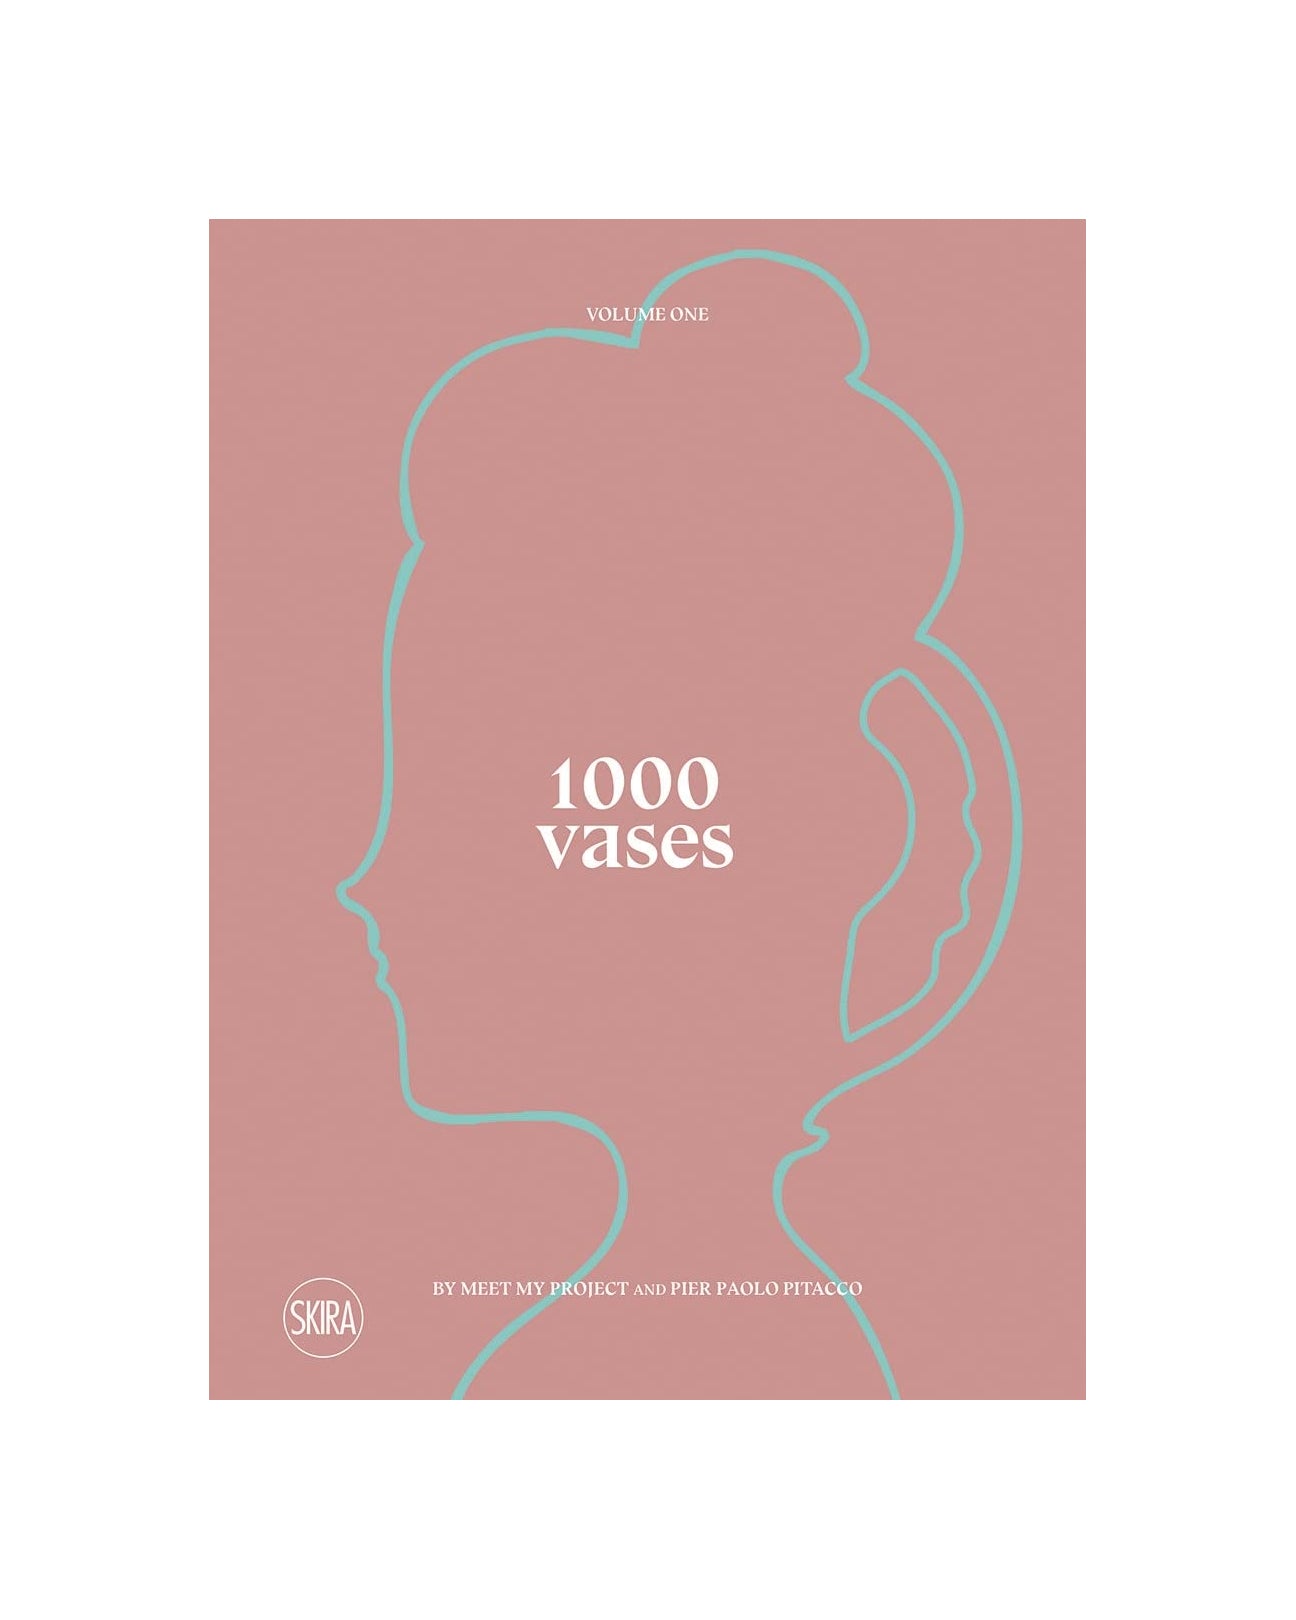 1000 Vases, Volume 1 by Meet My Project and Pier Paolo Pitacco